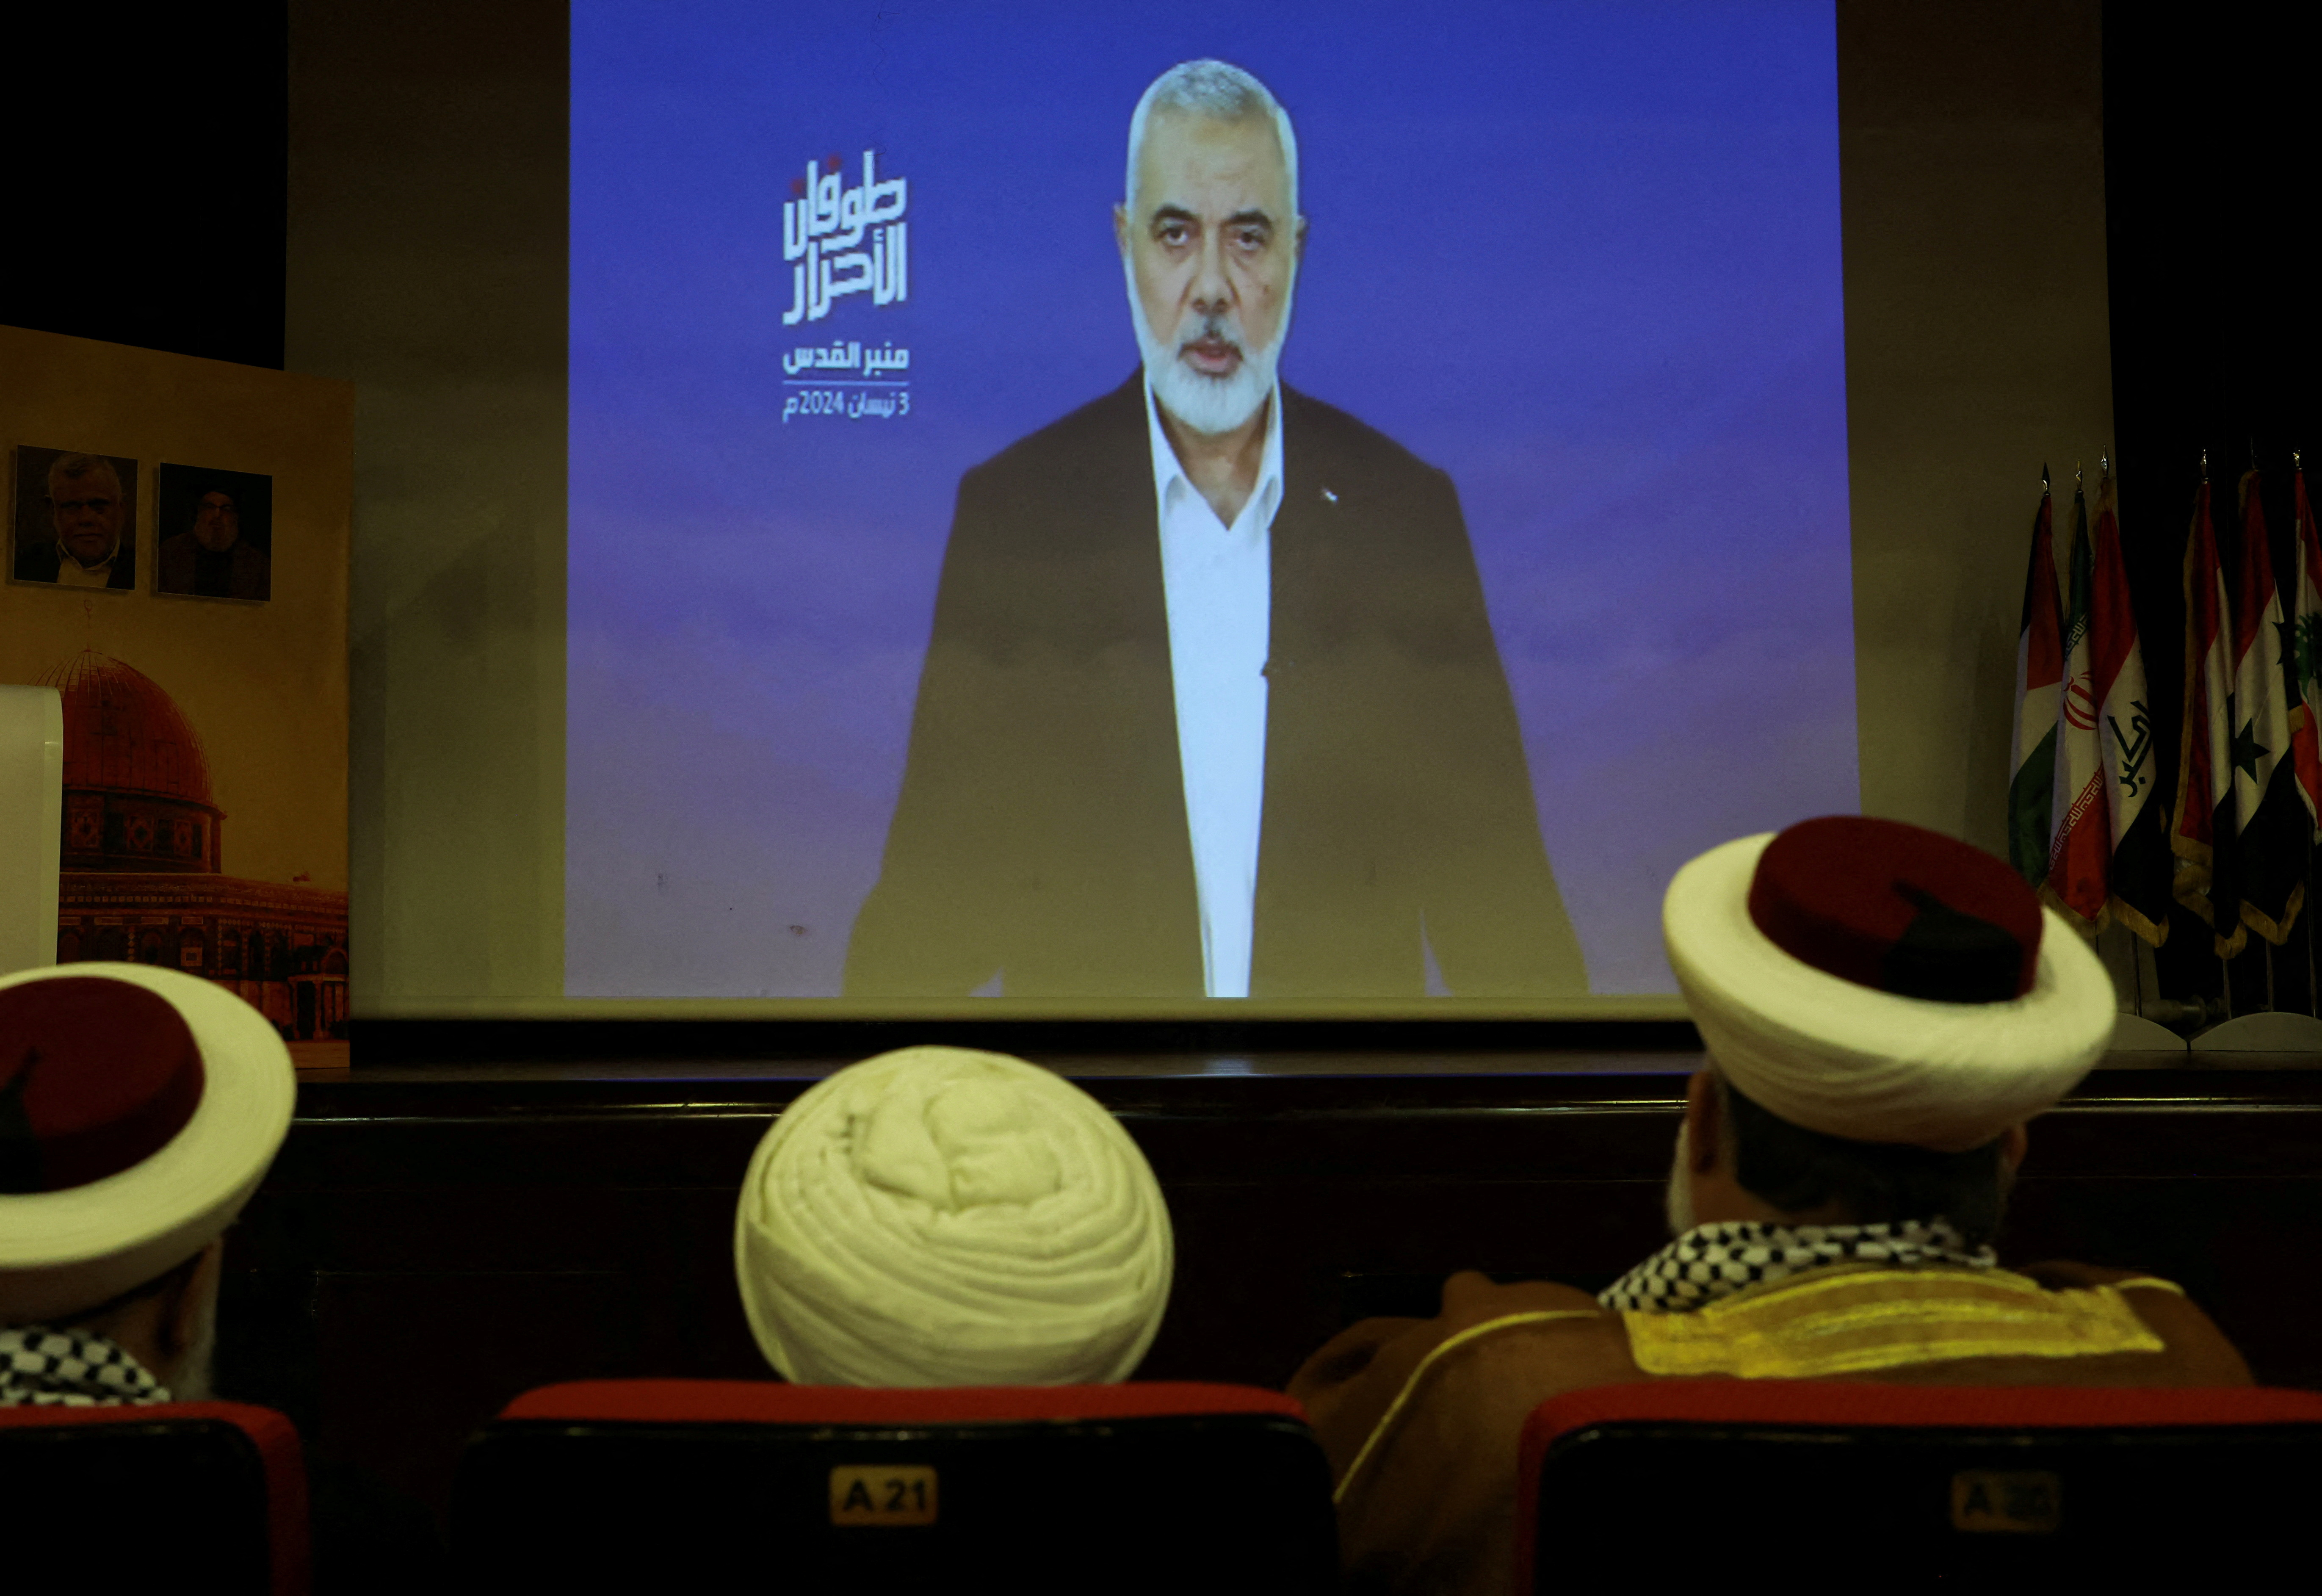 Hamas chief Ismail Haniyeh speaks in a pre-recorded message shown on a screen during an event ahead of al-Quds, in Beirut